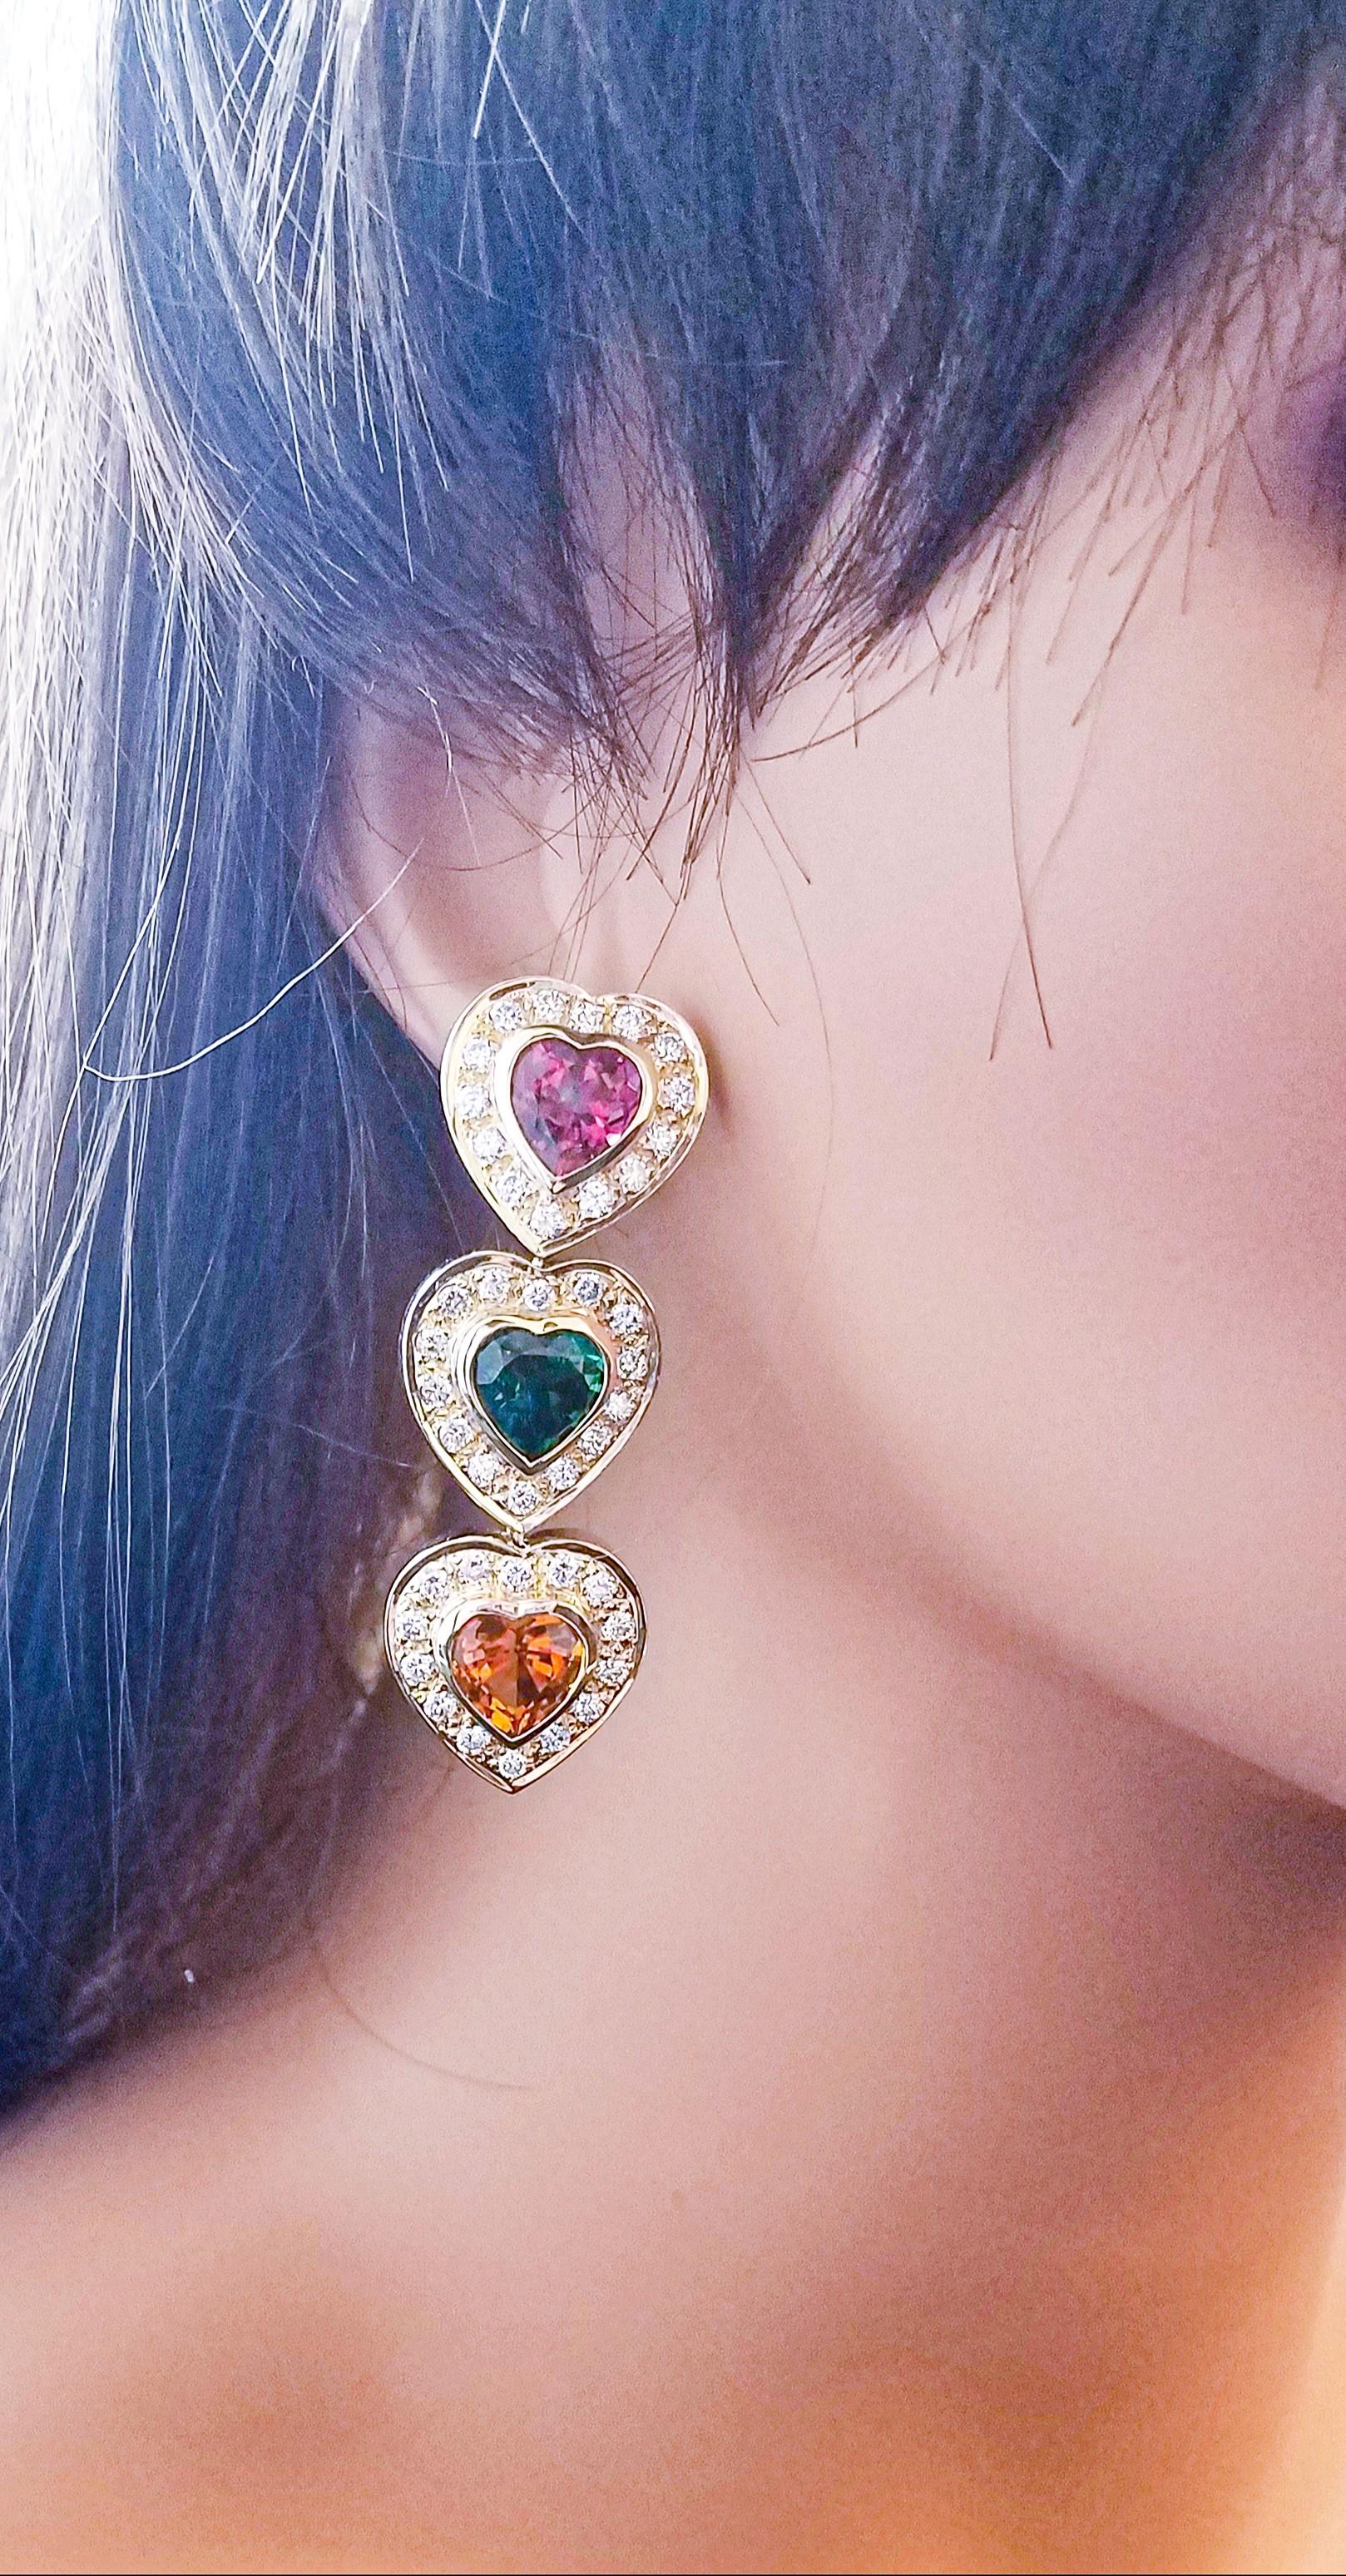 These heart cluster halo earrings are made in a brightly polished 14 k karat yellow gold finish and contain a total of 15.00 carats of vibrant multi-colored tourmaline heart-shaped stones prong-set in the center. These tourmalines exhibit a natural,